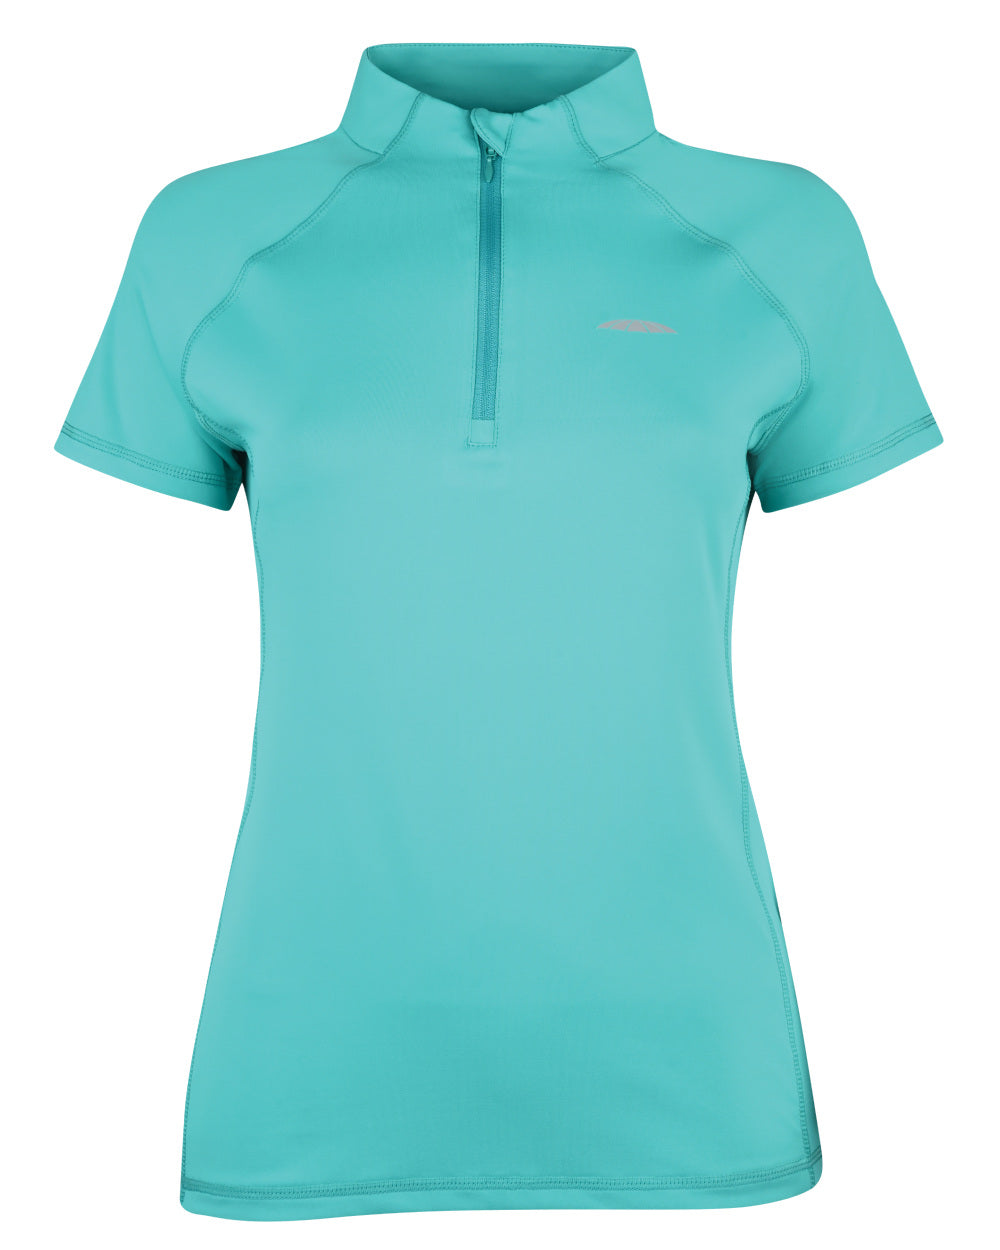 Turquoise Coloured WeatherBeeta Prime Short Sleeve Top On A White Background 